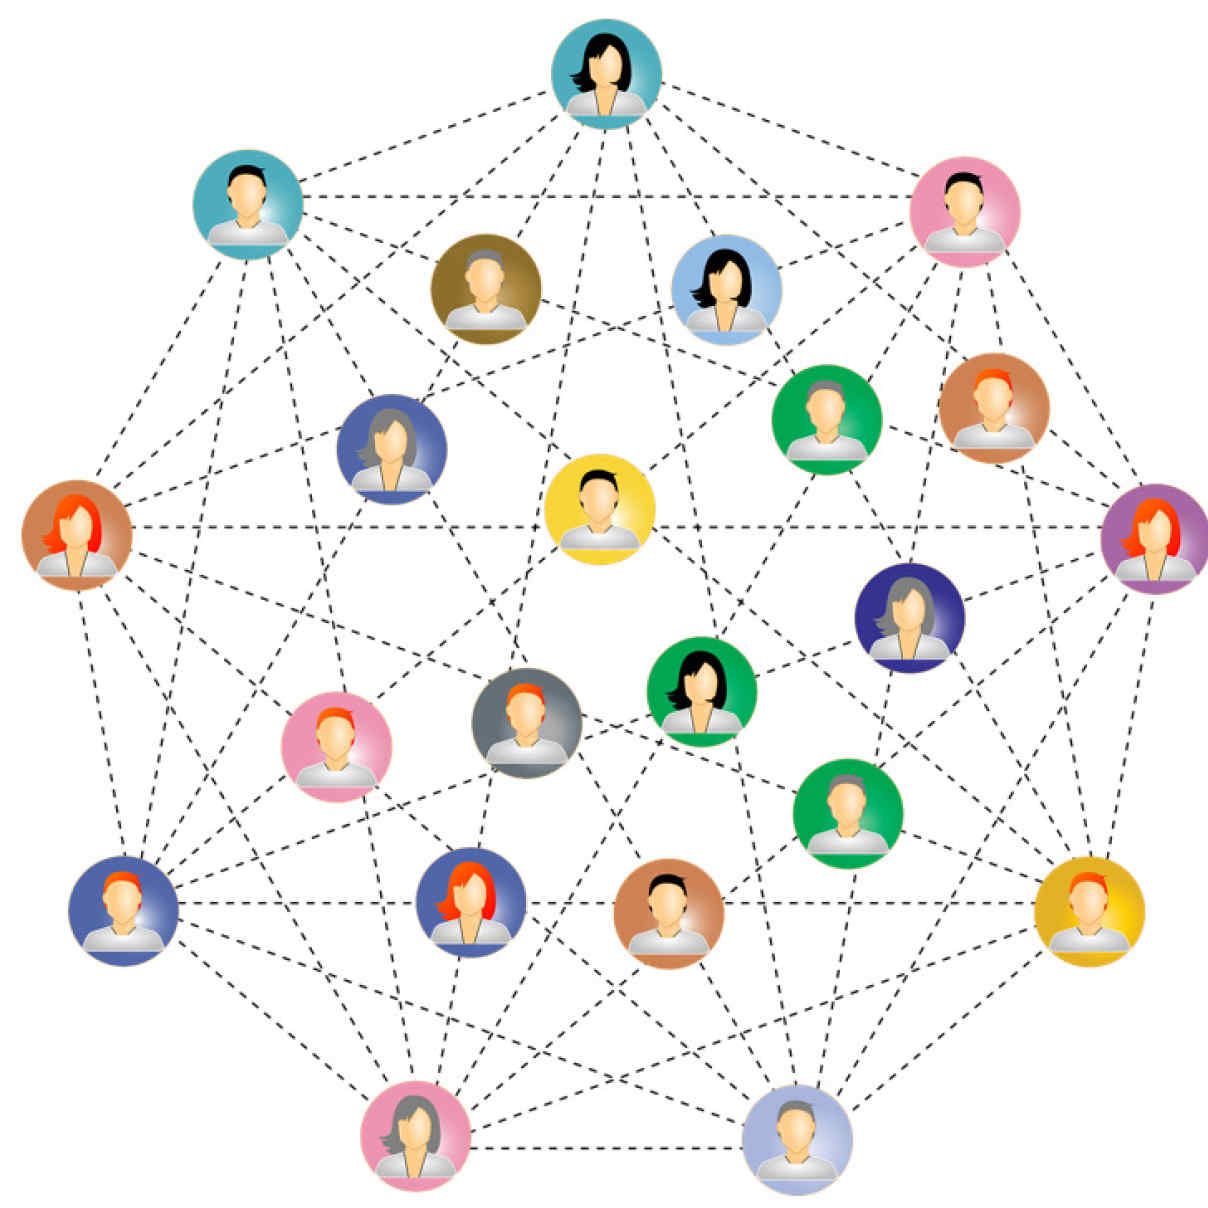 Many icons of people connected in a big network